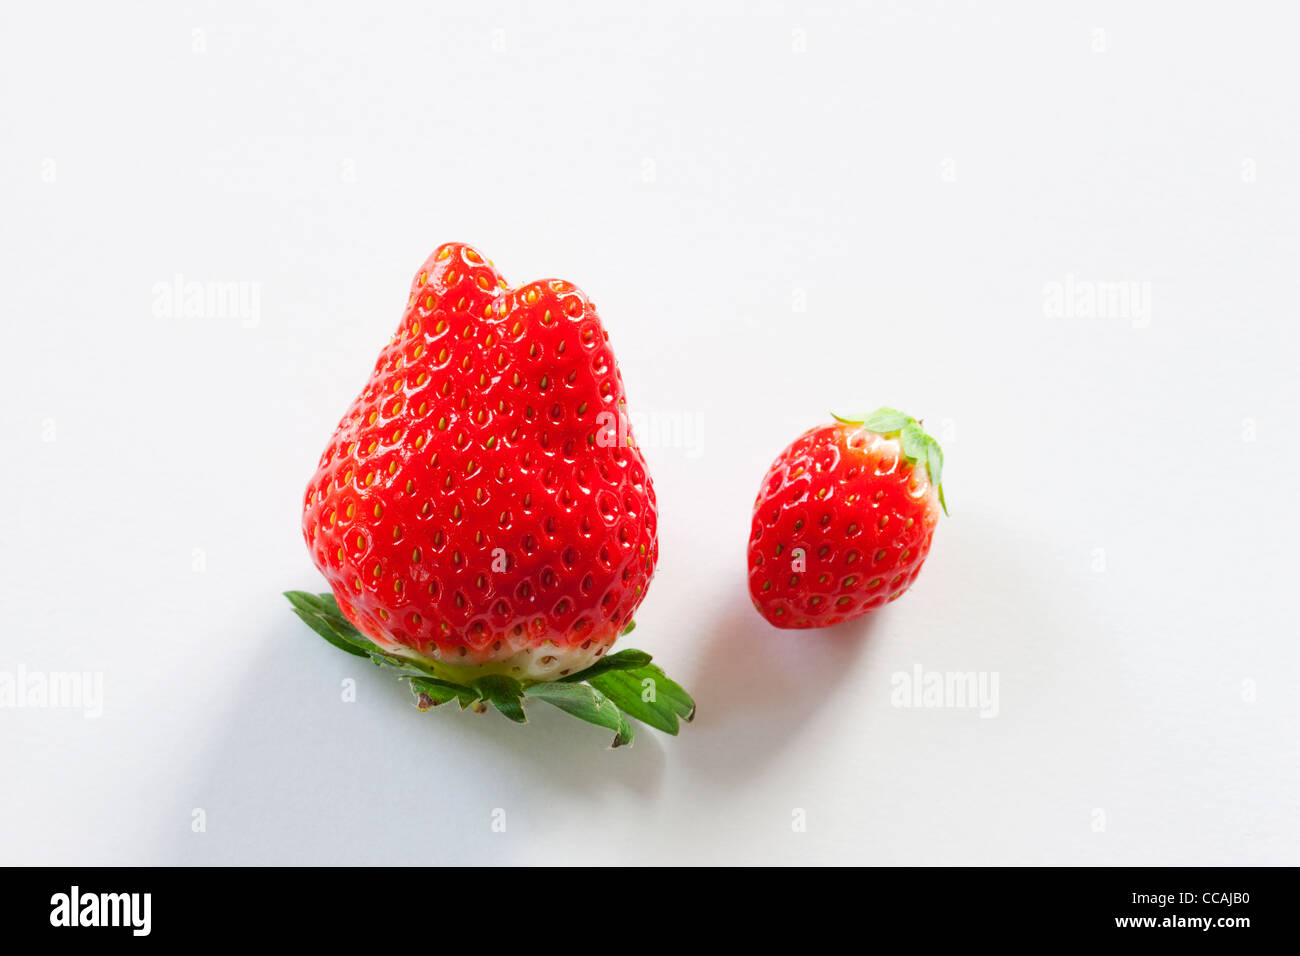 Large and Small Strawberry Stock Photo